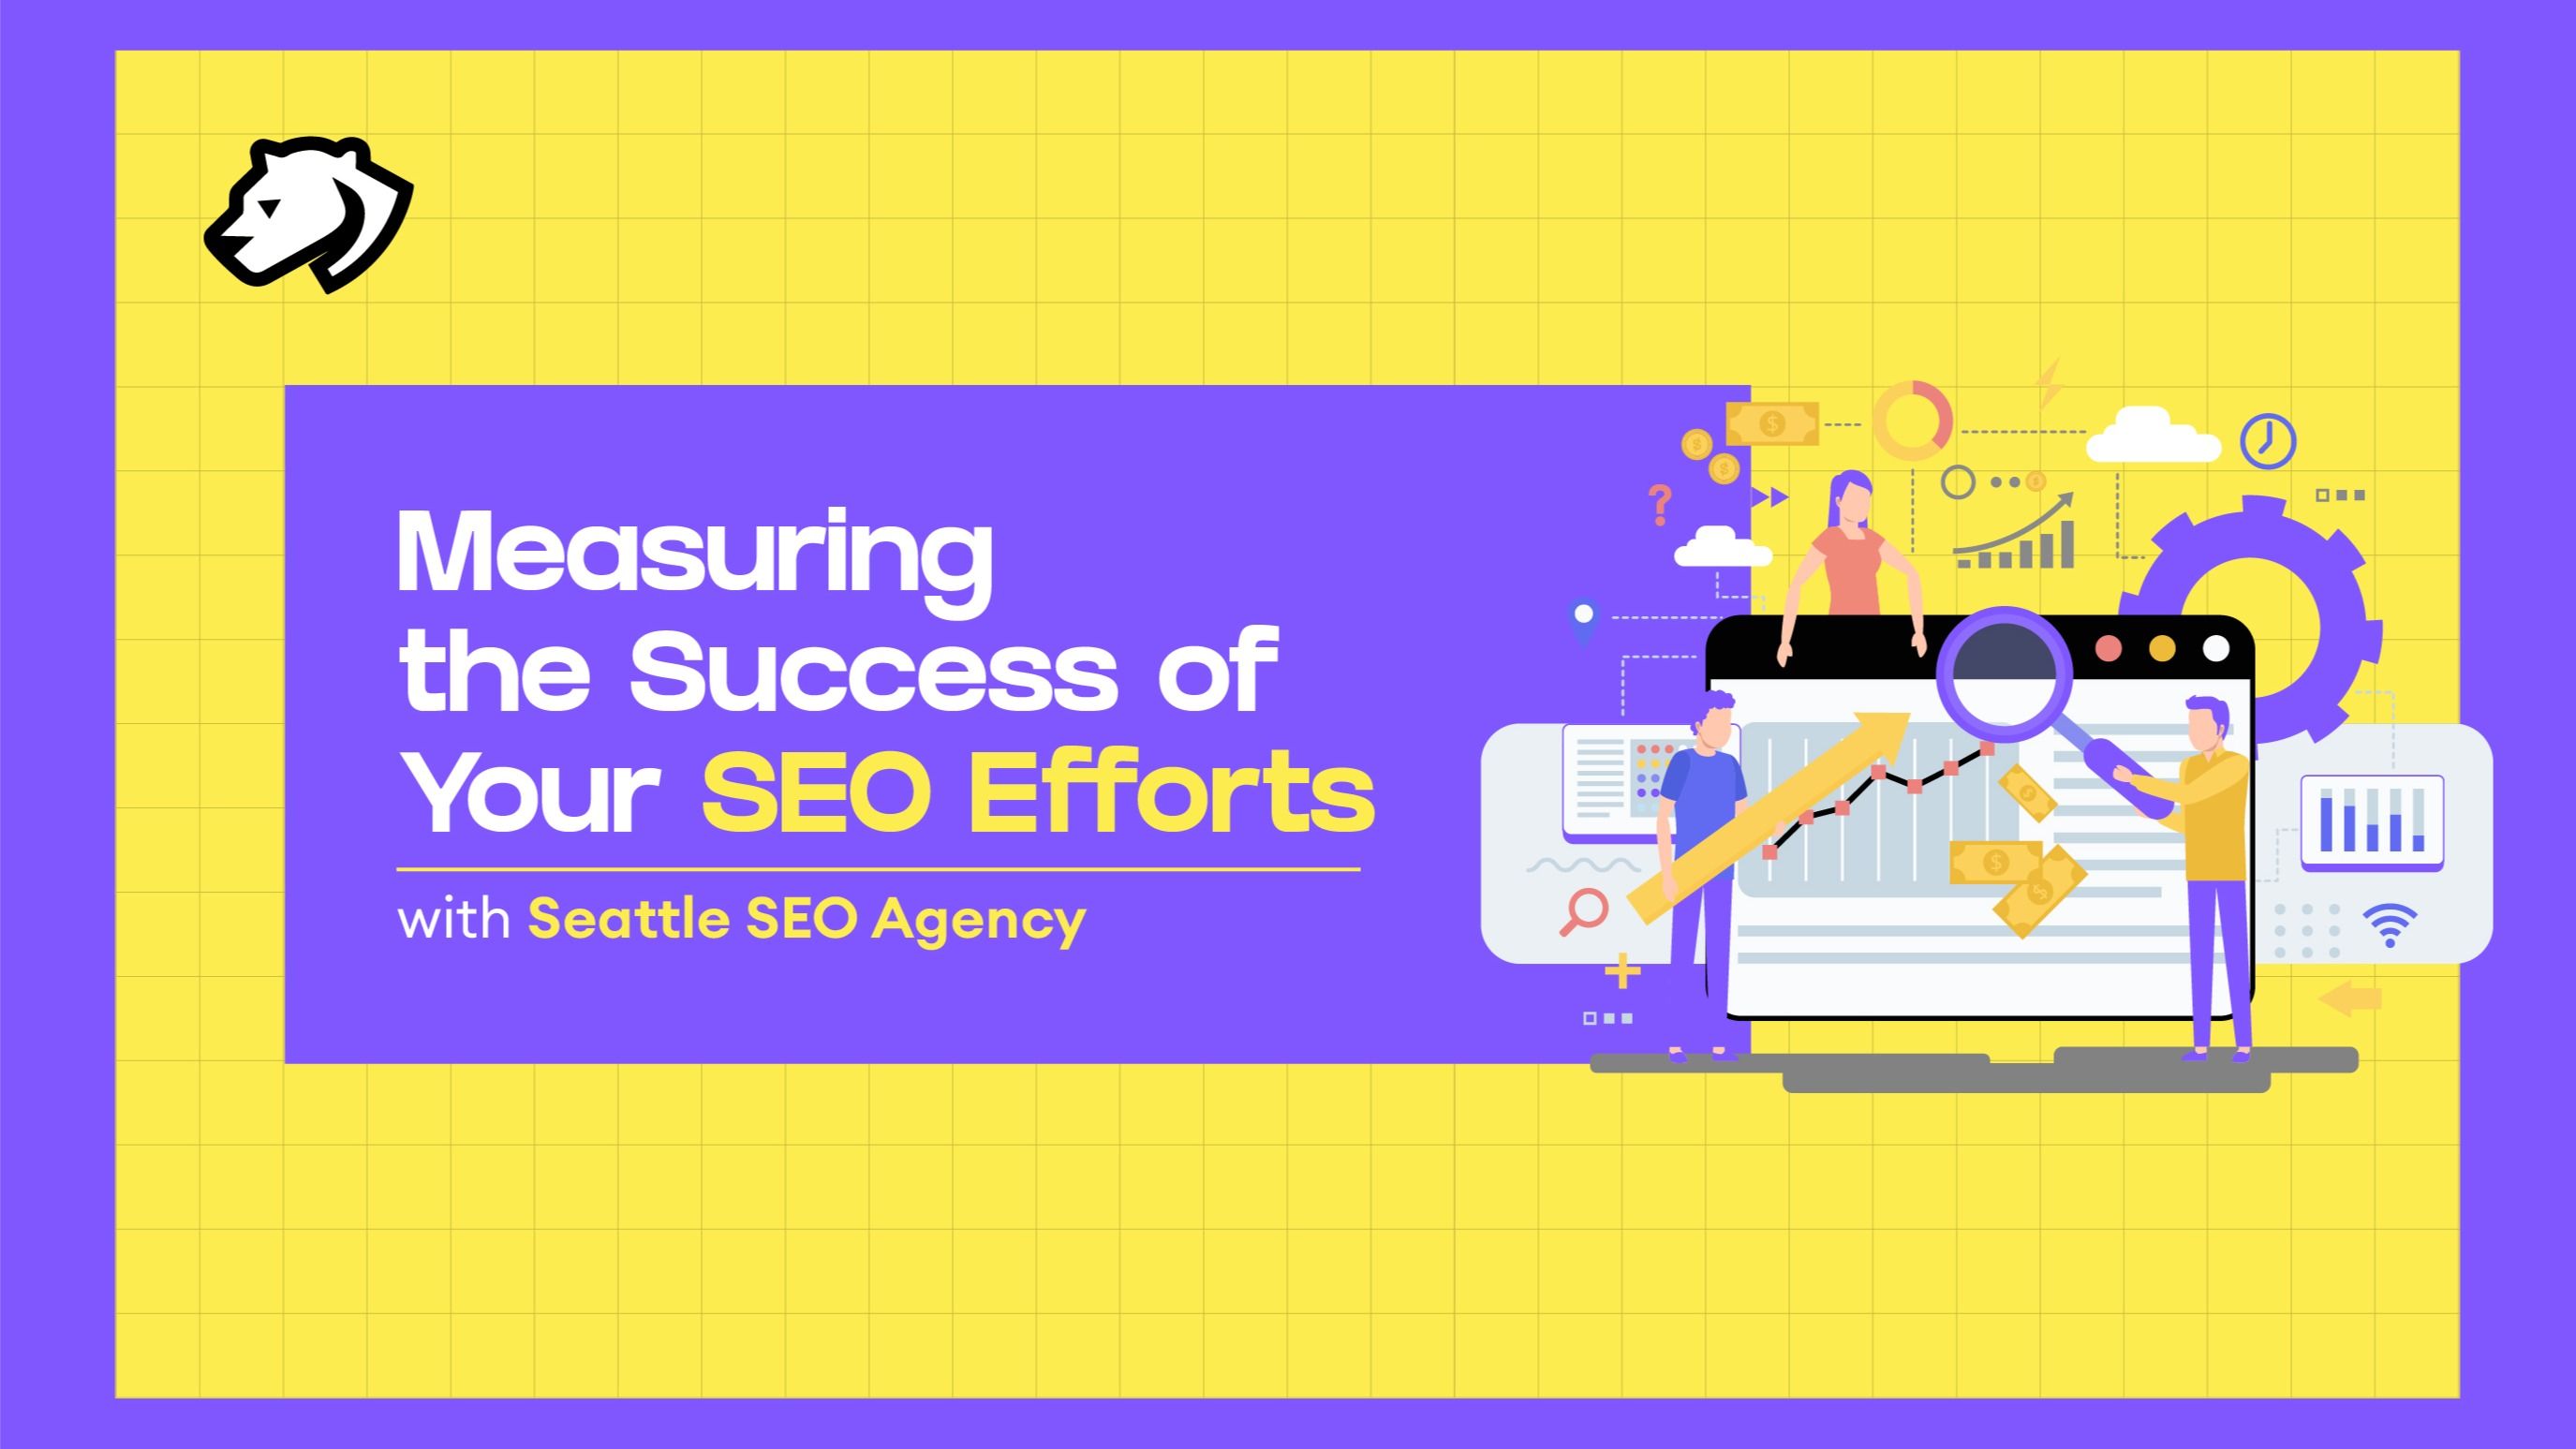 Measuring the Success of Your SEO Efforts with Seattle SEO Company - Seattle SEO Agency |